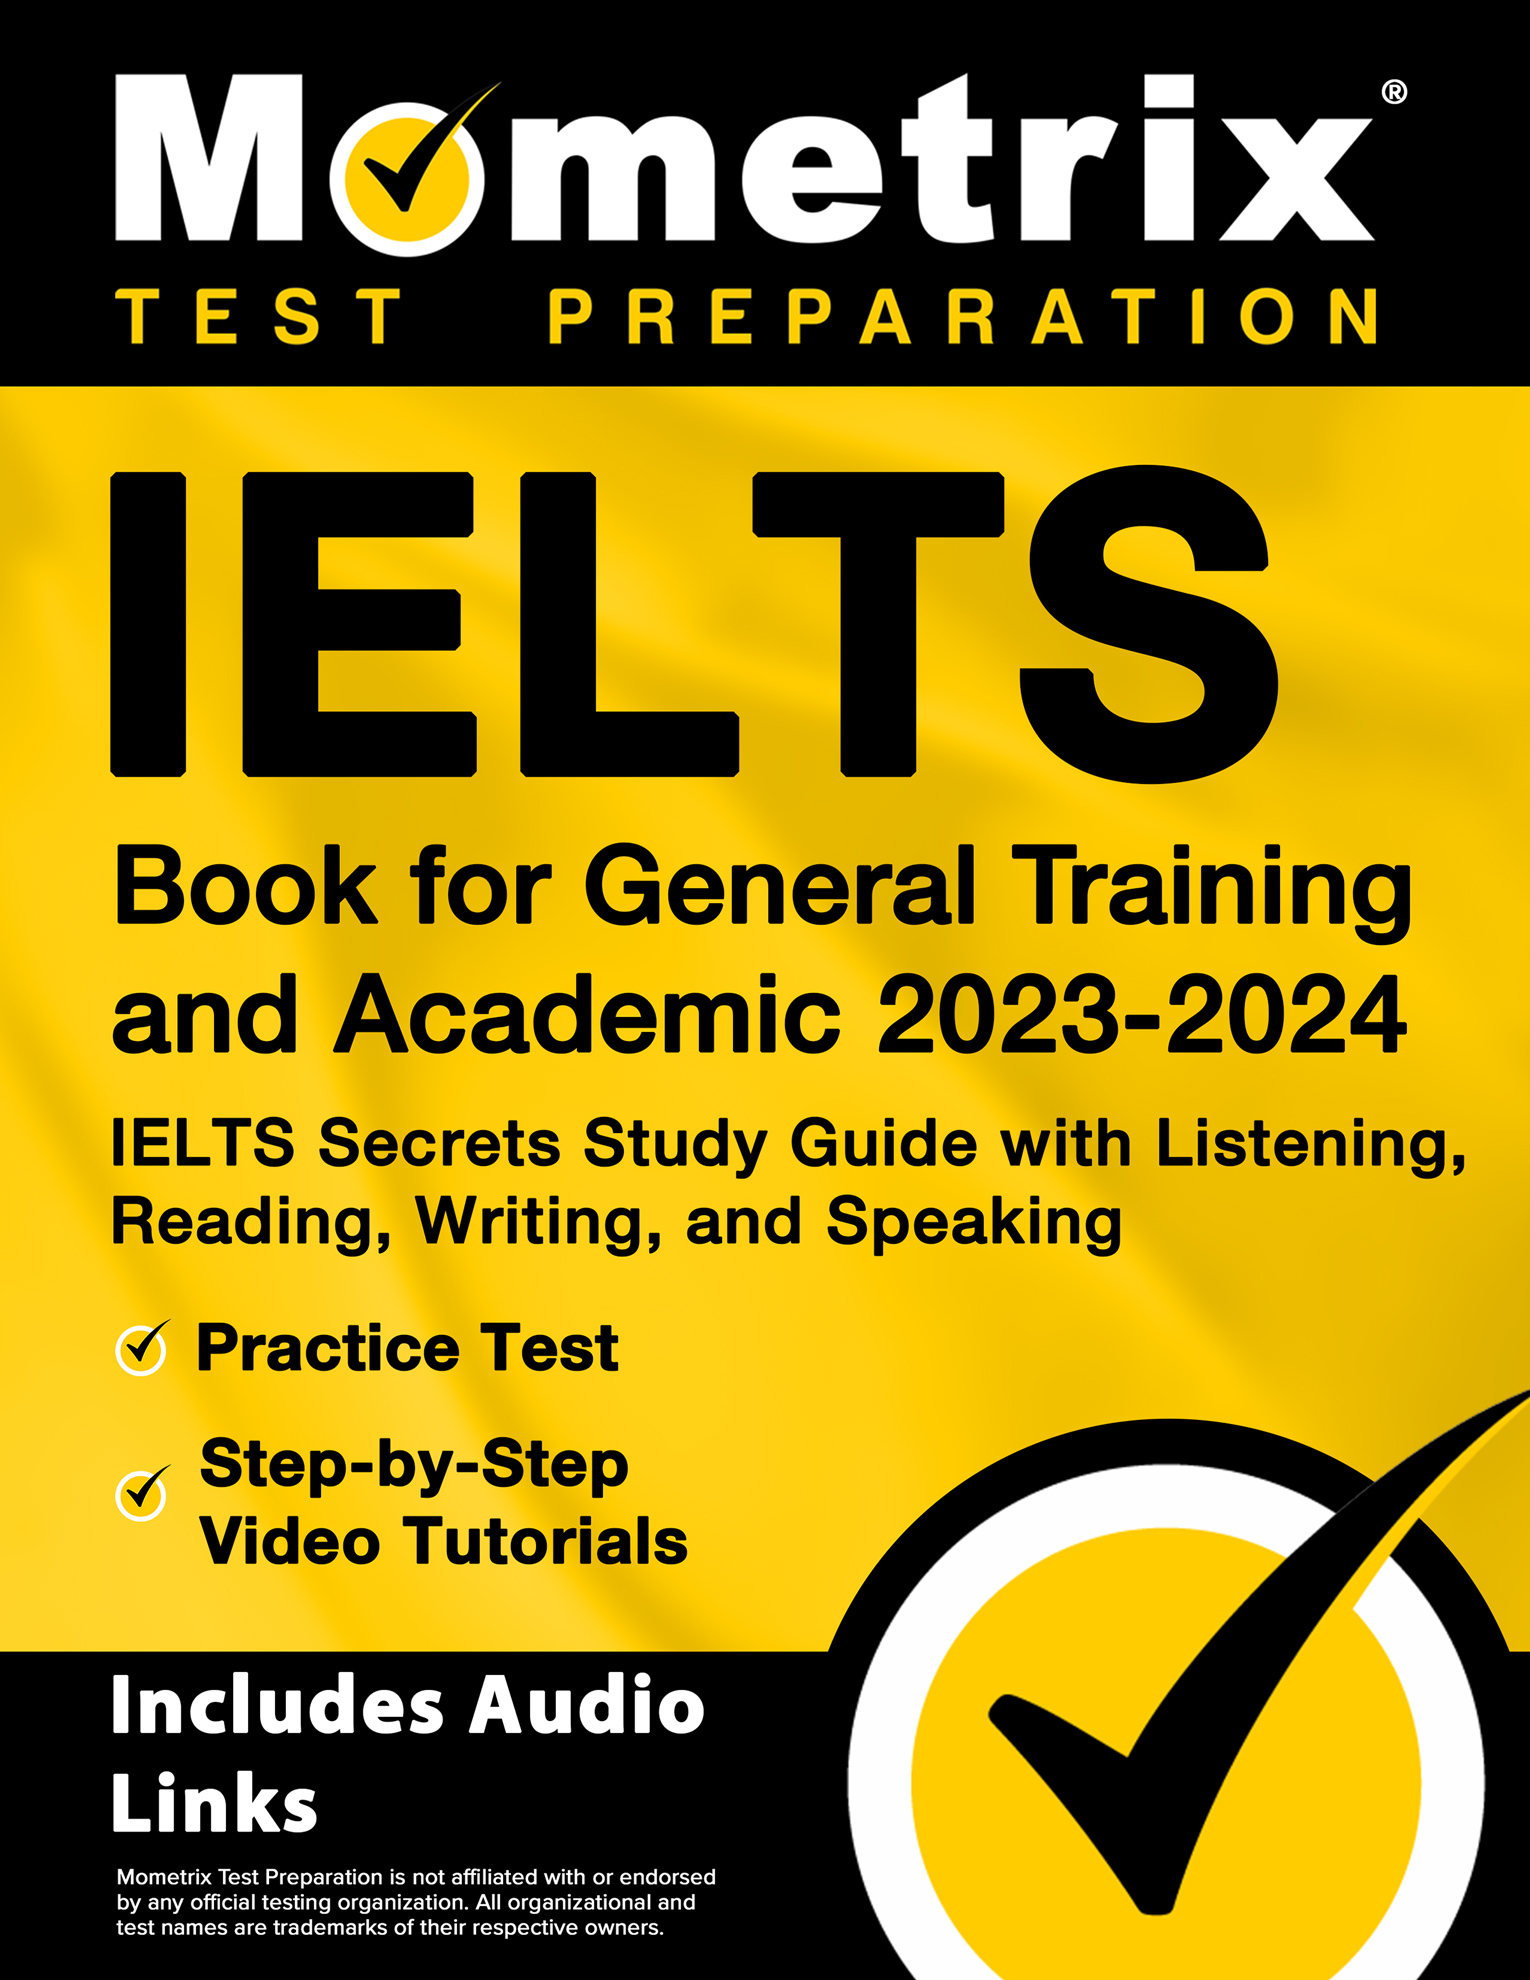 Ielts　Audio　Academic　General　Video　Secrets　[Includes　and　Ielts　for　Tutorials:　2023-2024　Listening,　Speaking,　Reading,　Practice　Step-By-Step　Book　Test,　Links]　Training　with　Guide　and　Study　Writing,